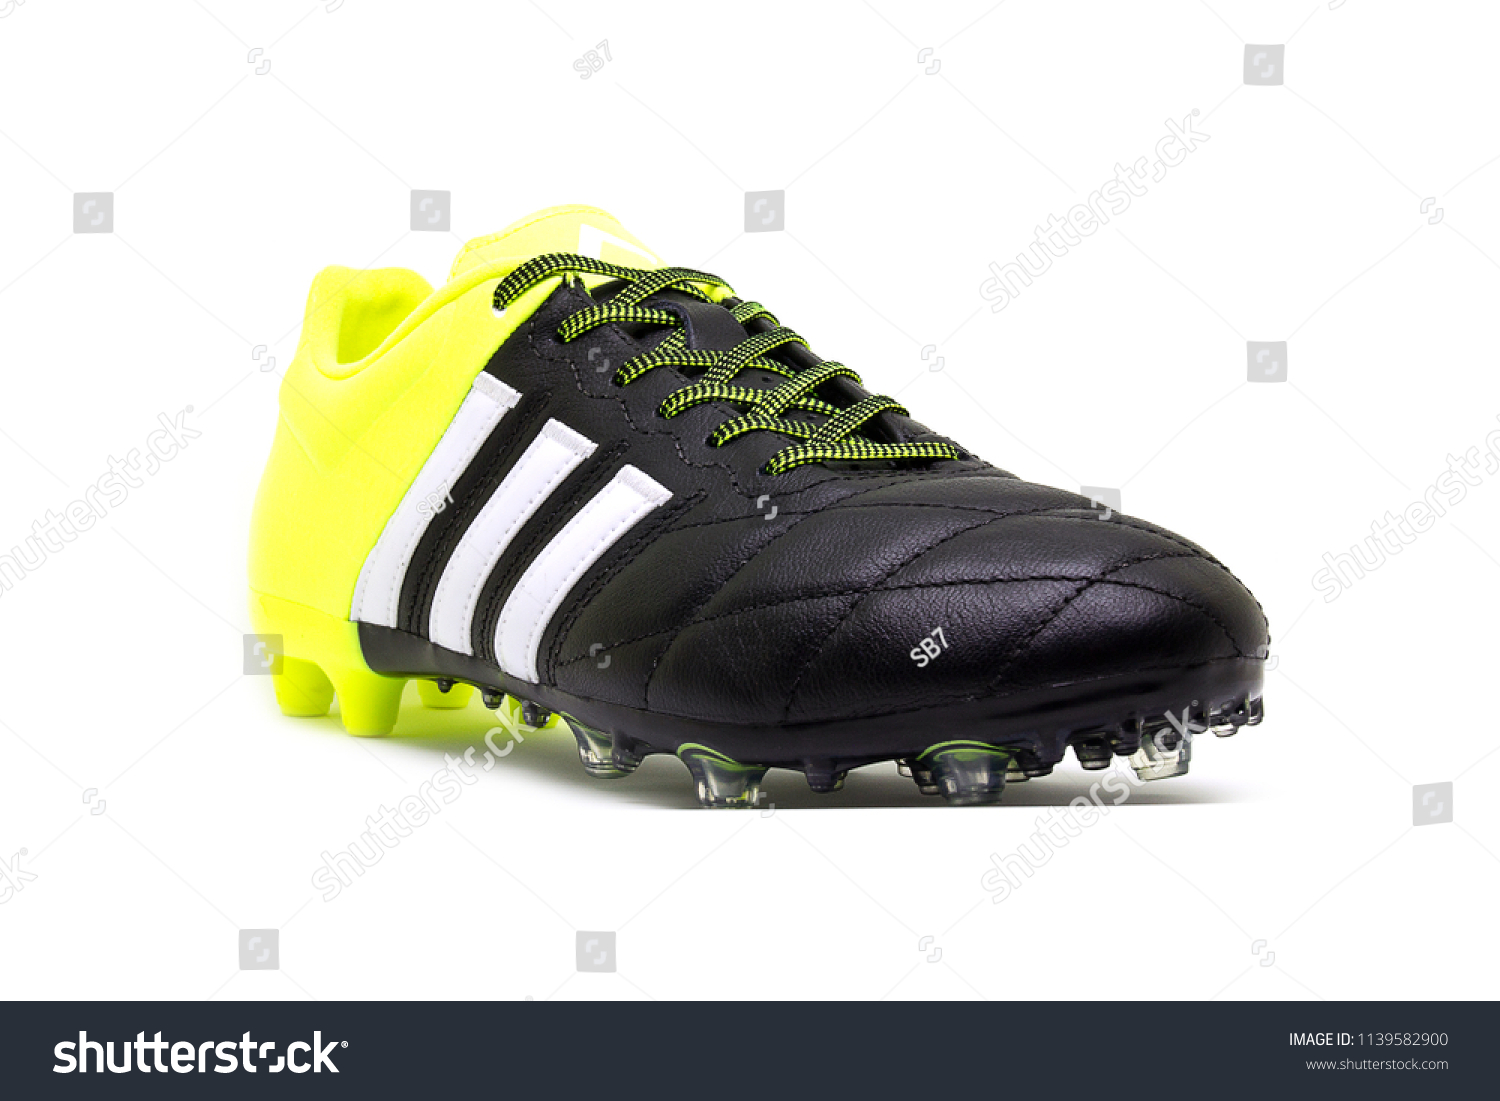 soccer shoes for fake grass